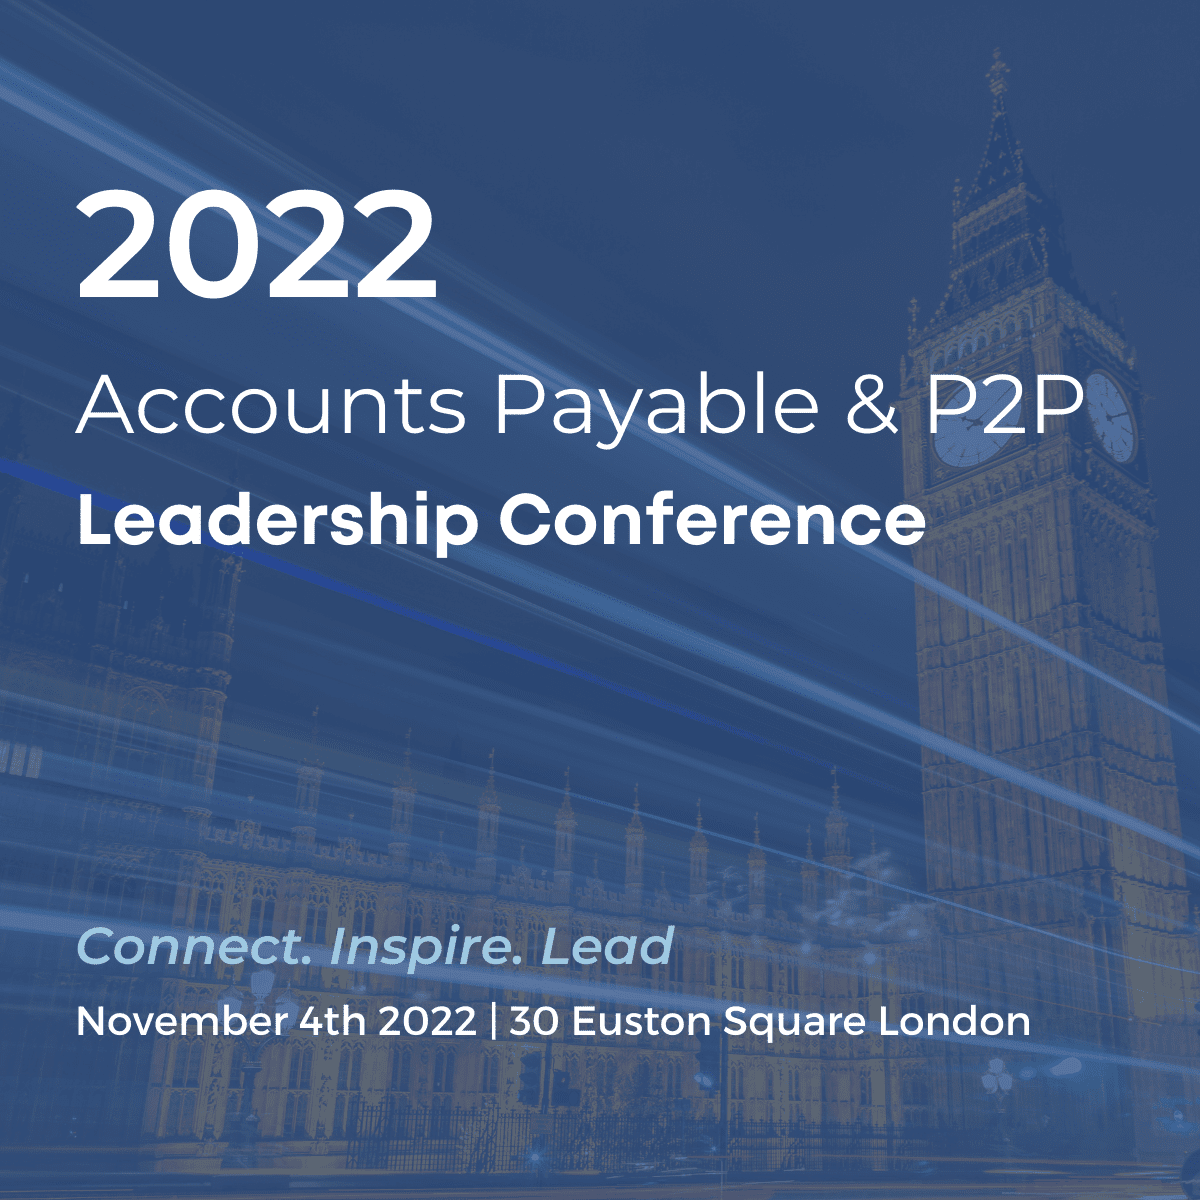 IFOL announces Accounts Payable and P2P Leadership Conference 2022 in